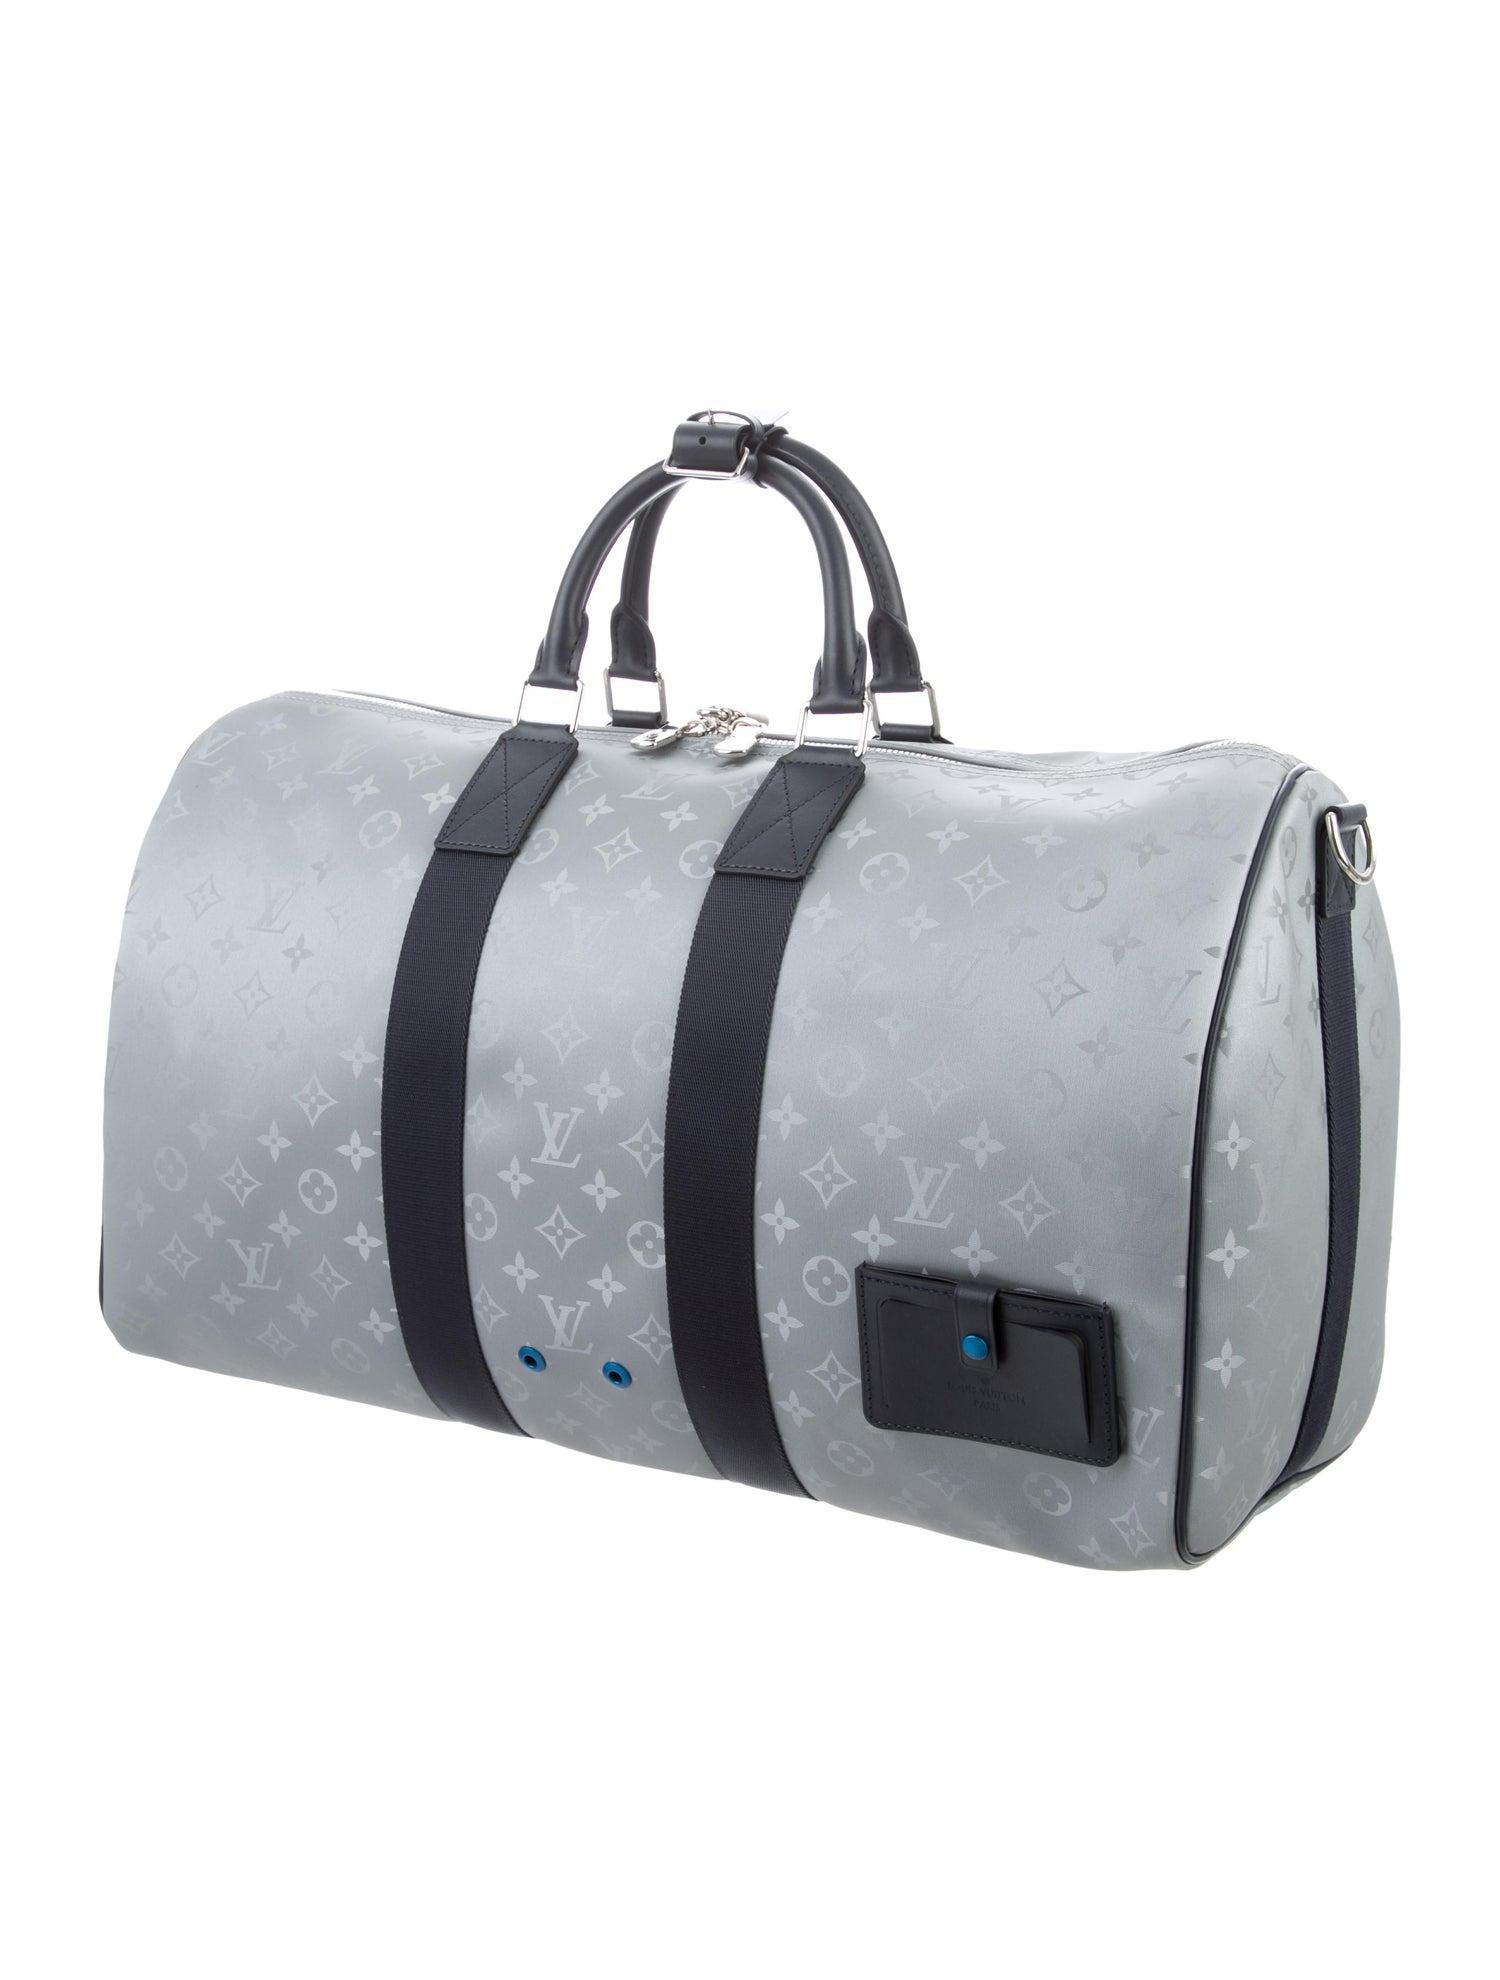 Louis Vuitton NEW Monogram Blue Silver Keepall Eclipse Top Handle Men's Women's Travel Duffle Bag

Monogram canvas 
Leather
Silver-tone hardware
Woven lining
Zipper closure
Made in France
Handle drop 4